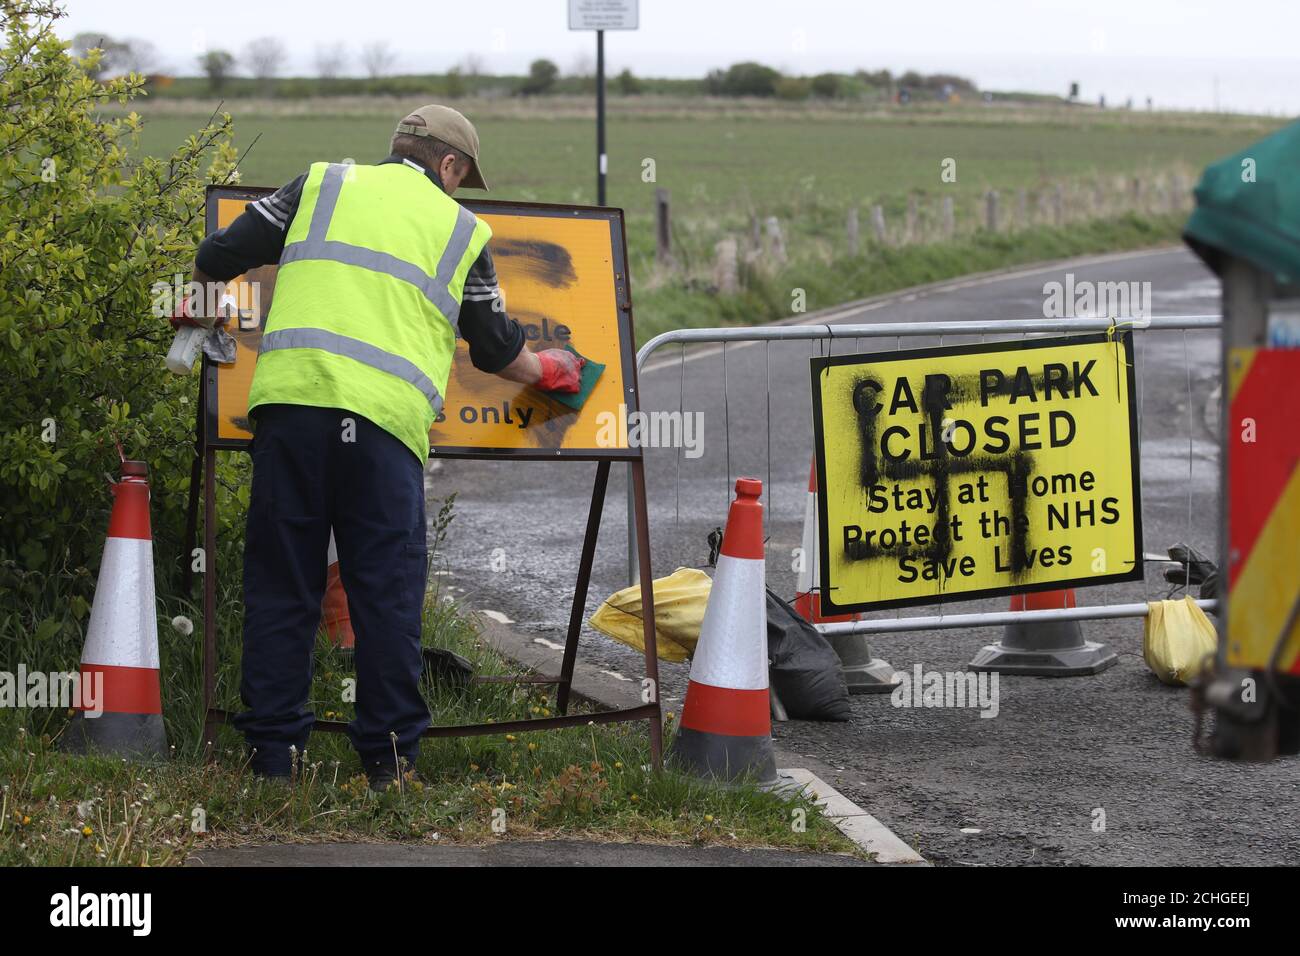 A worker removes a swastika spray painted on a sign at the entrance to a closed road and car park near Whitley Bay lighthouse, Northumberland. Graffiti has appeared on signs at several car parks along the Northumberland coastal road as the UK continues in lockdown to help curb the spread of the coronavirus. Stock Photo